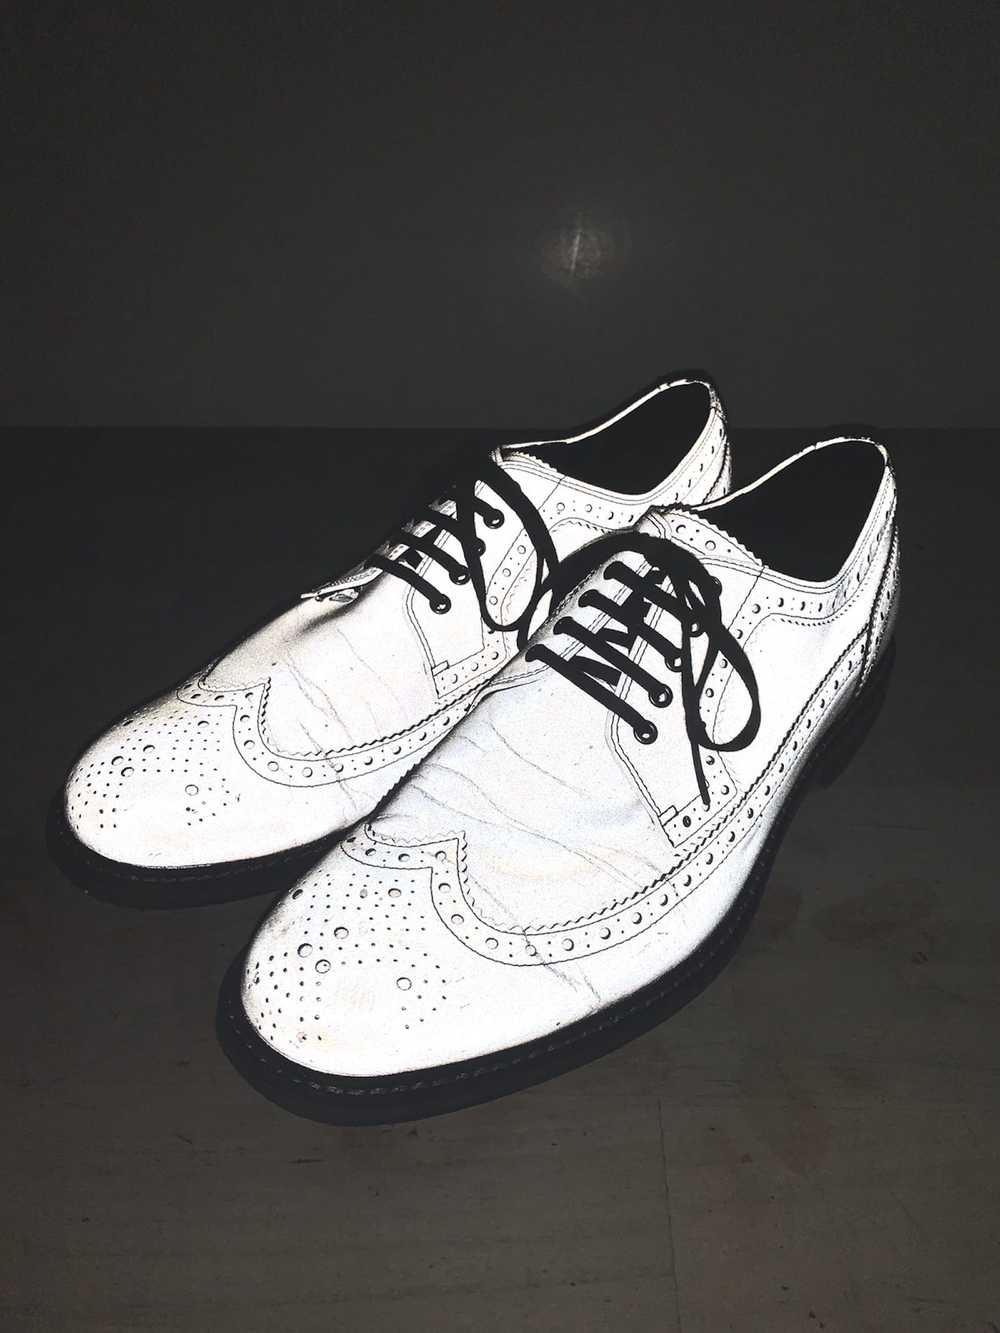 Cole Haan Cooper Square 3M Reflective Wingtip Oxf… - image 2